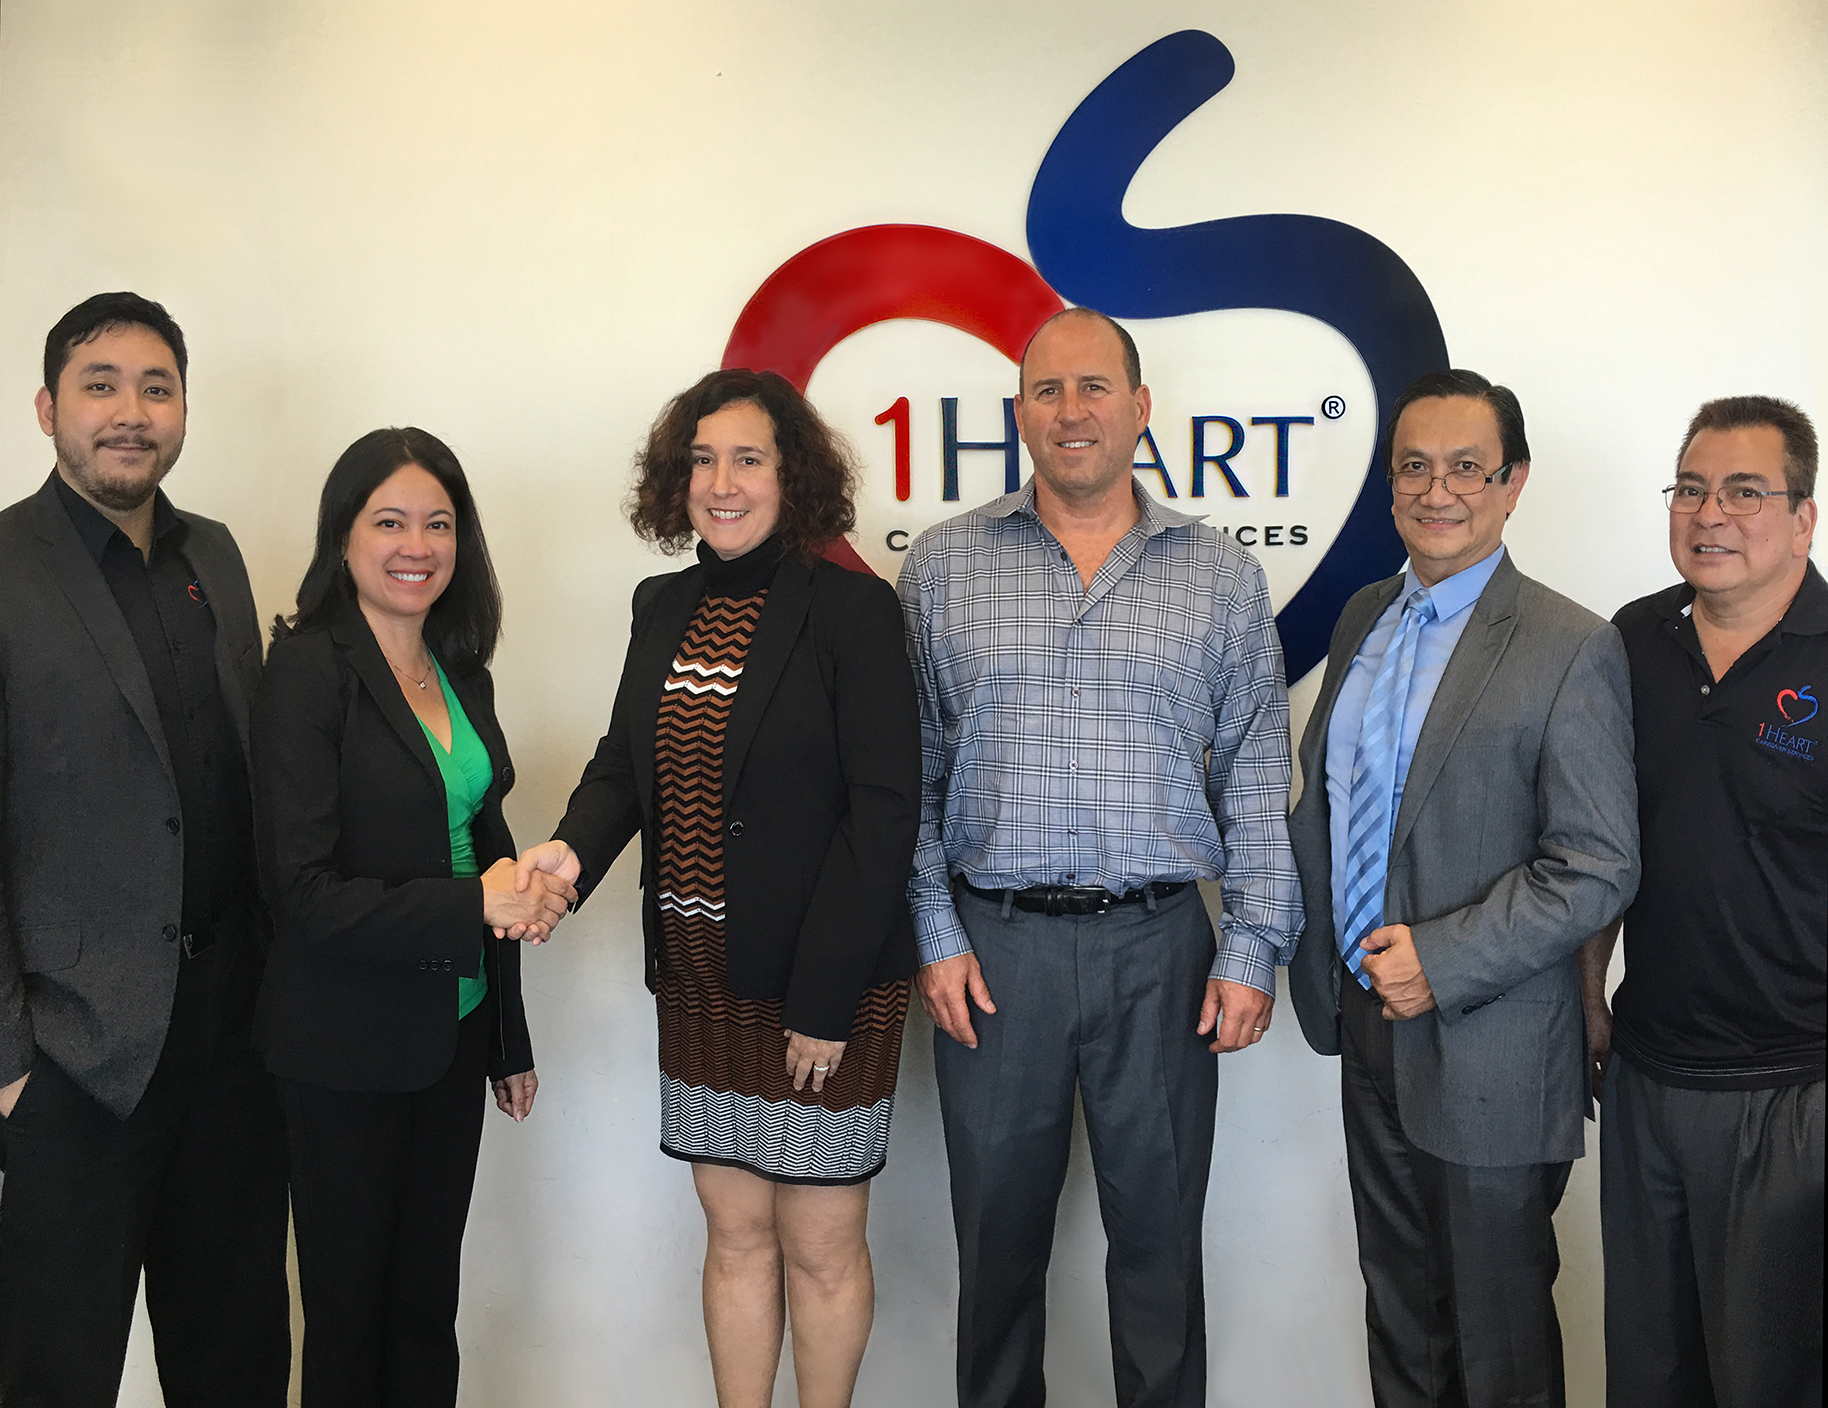 Susan and Joel Geffen new 1Heart South Bay franchise